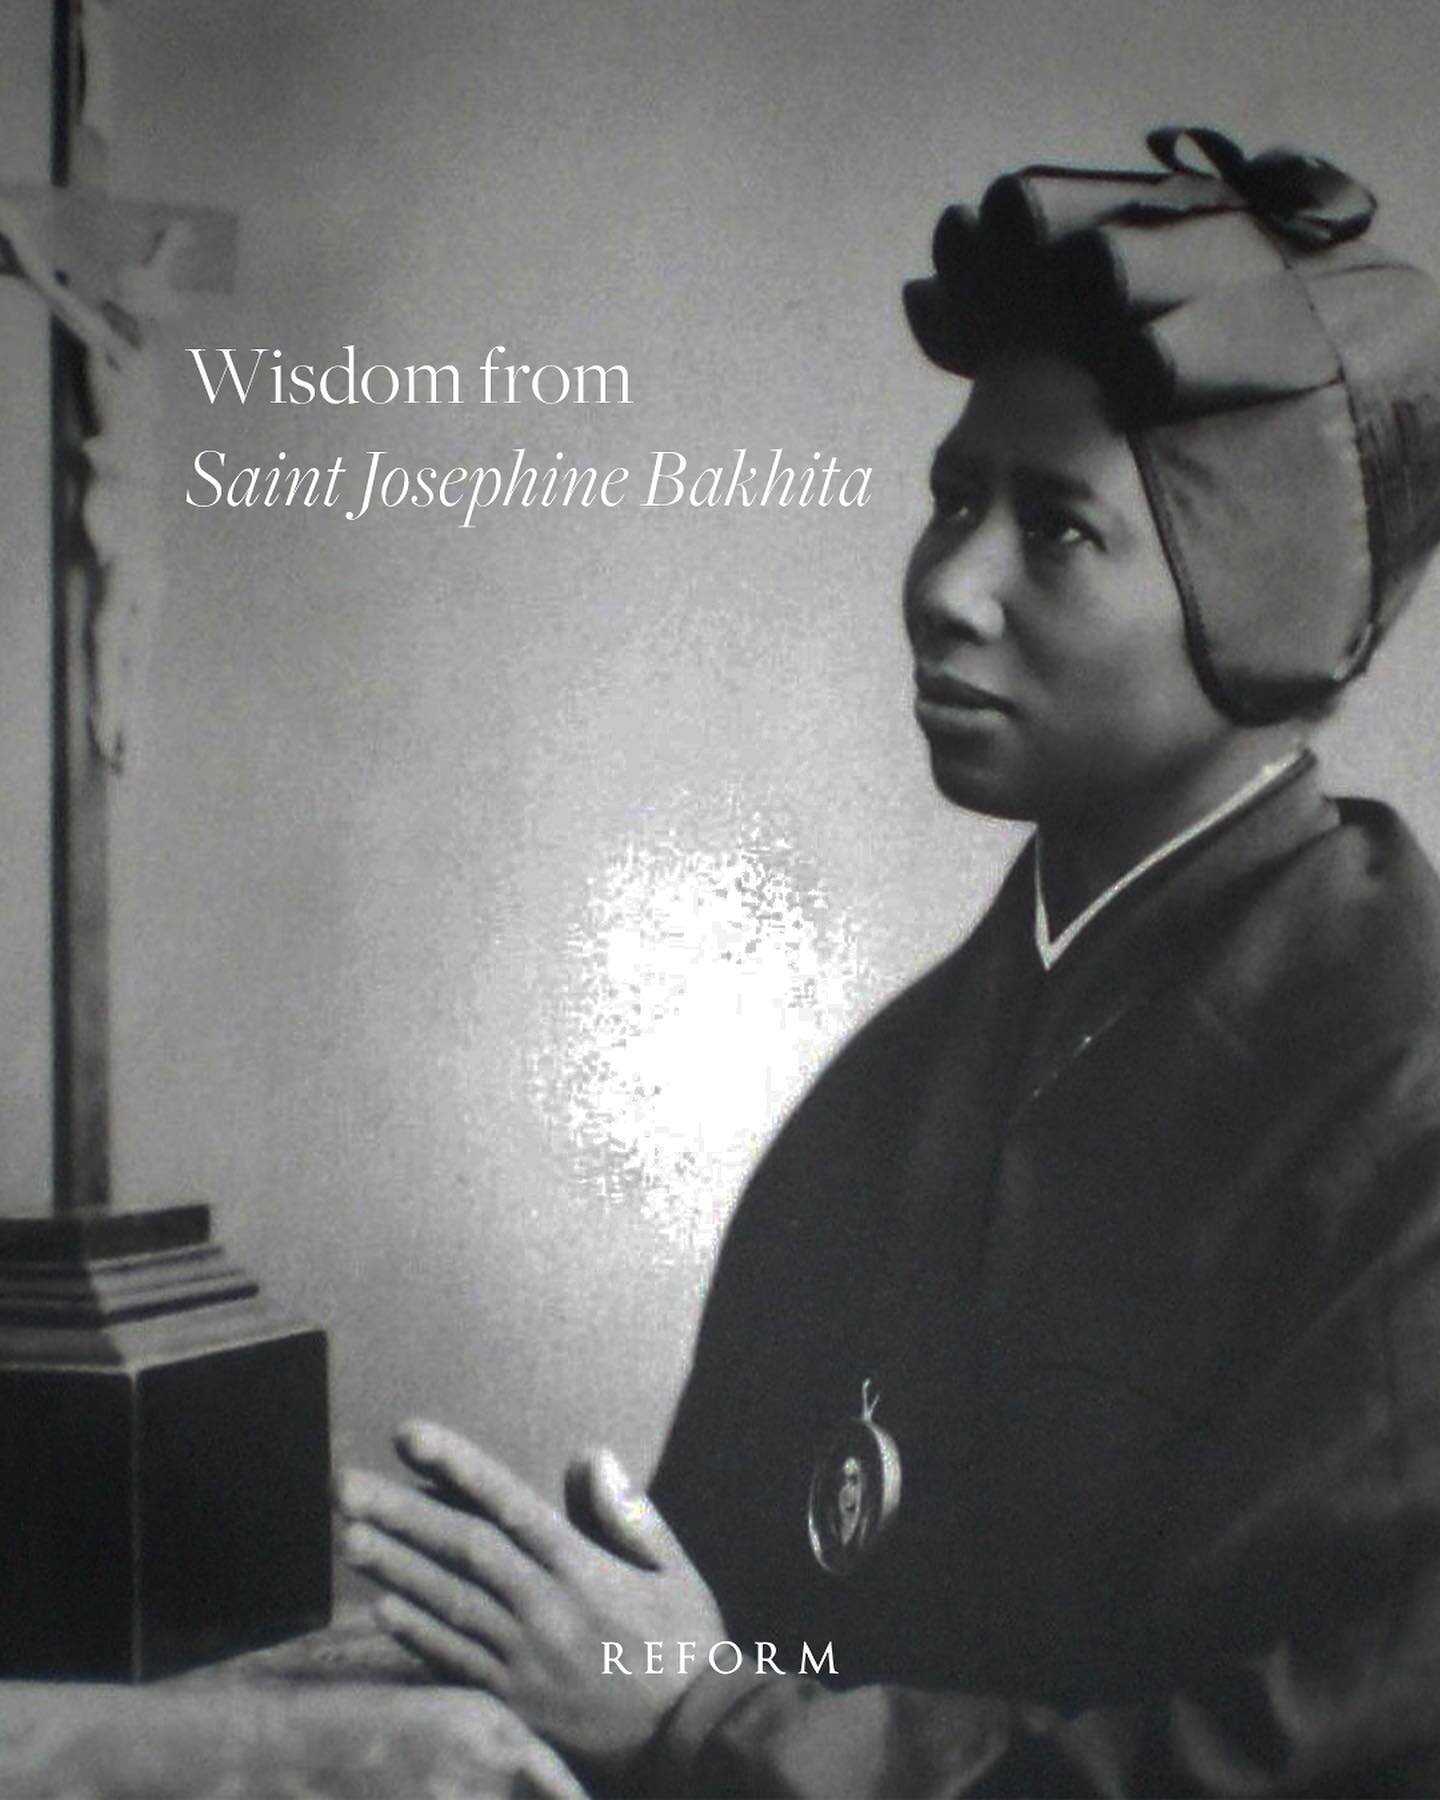 Today we celebrate the life of St. Josephine Bakhita, a Canossian Sister who was kidnapped and sold into slavery in Sudan.

Josephine Bakhita was born in 1869, in a small village of Sudan. She was kidnapped while working in the fields with her family